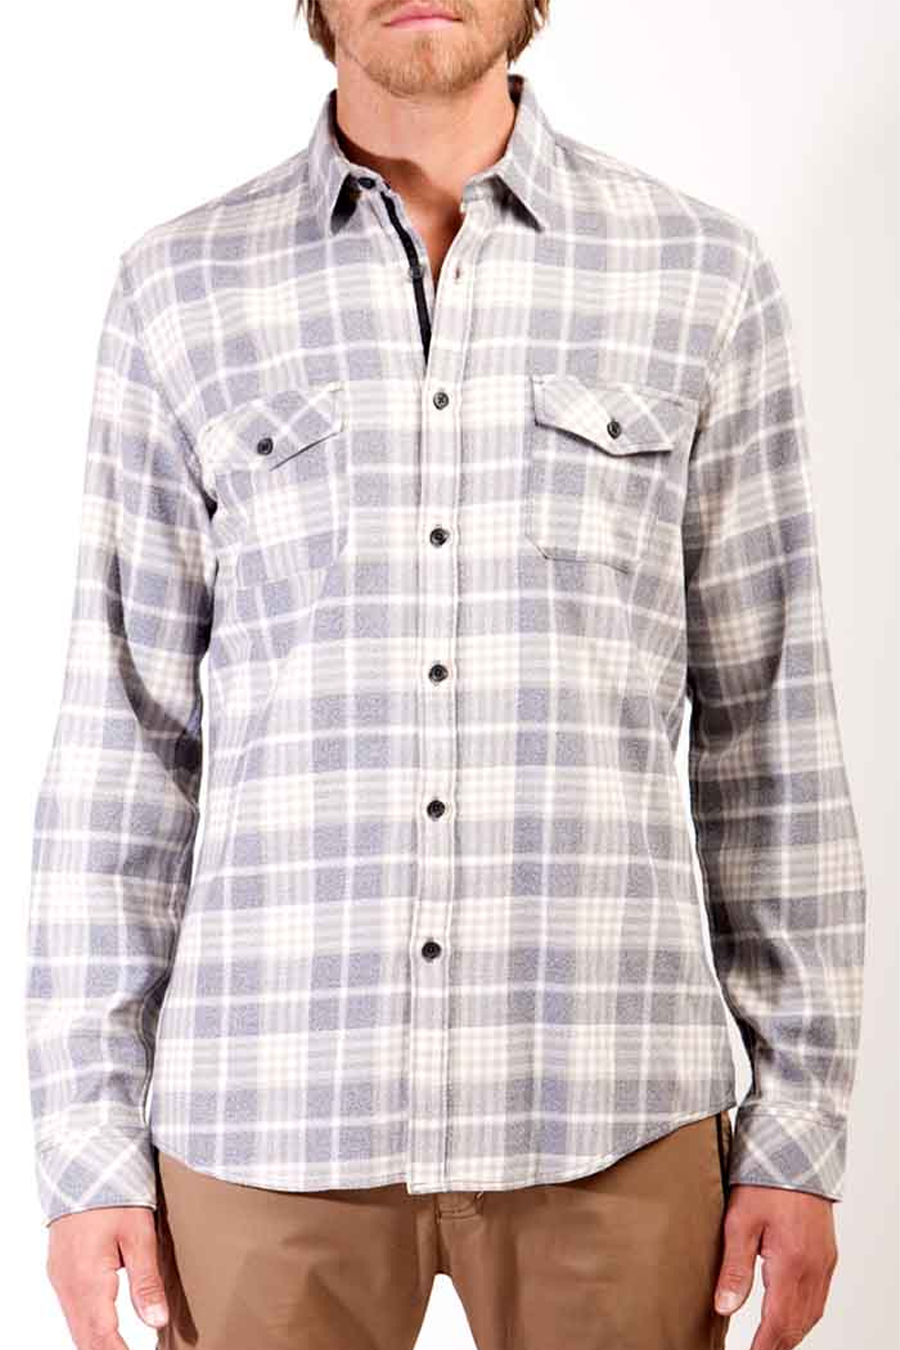 Lawless Plaid Shirt | Heather Gray - Main Image Number 1 of 2